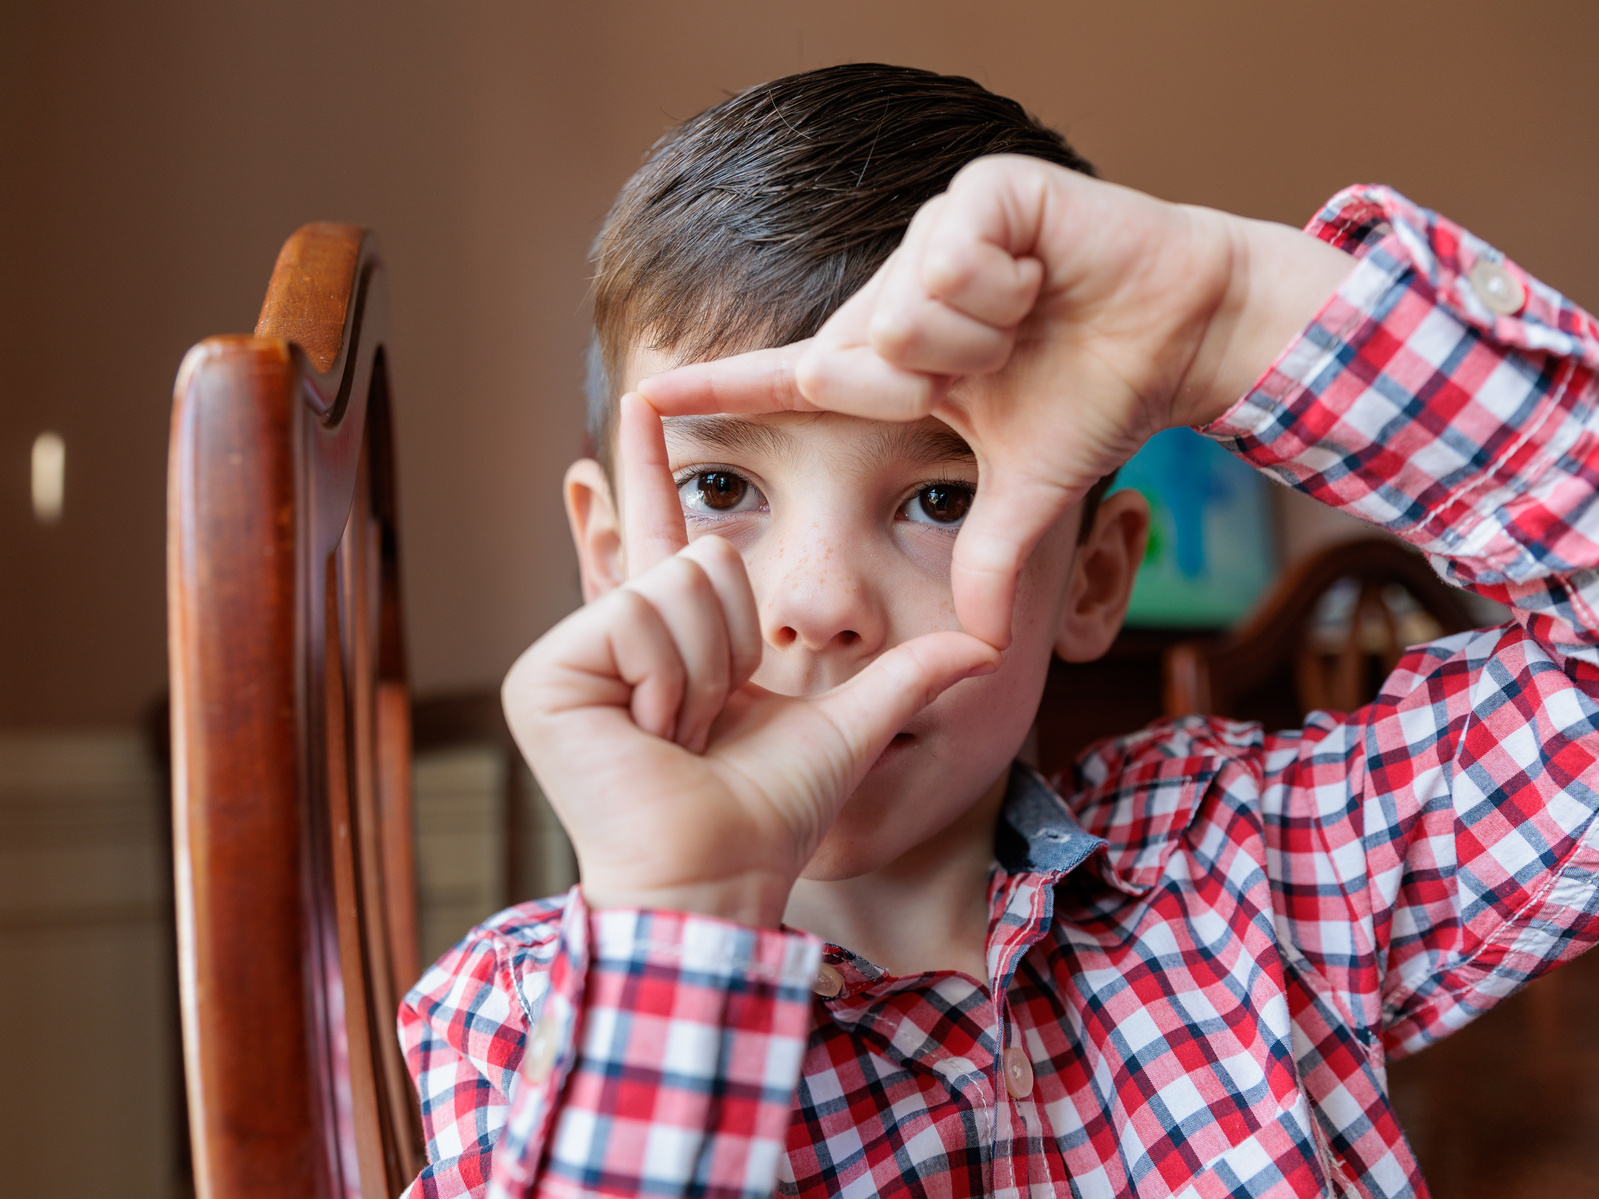 A small boy in a plaid shirt makes a square shape with his hands